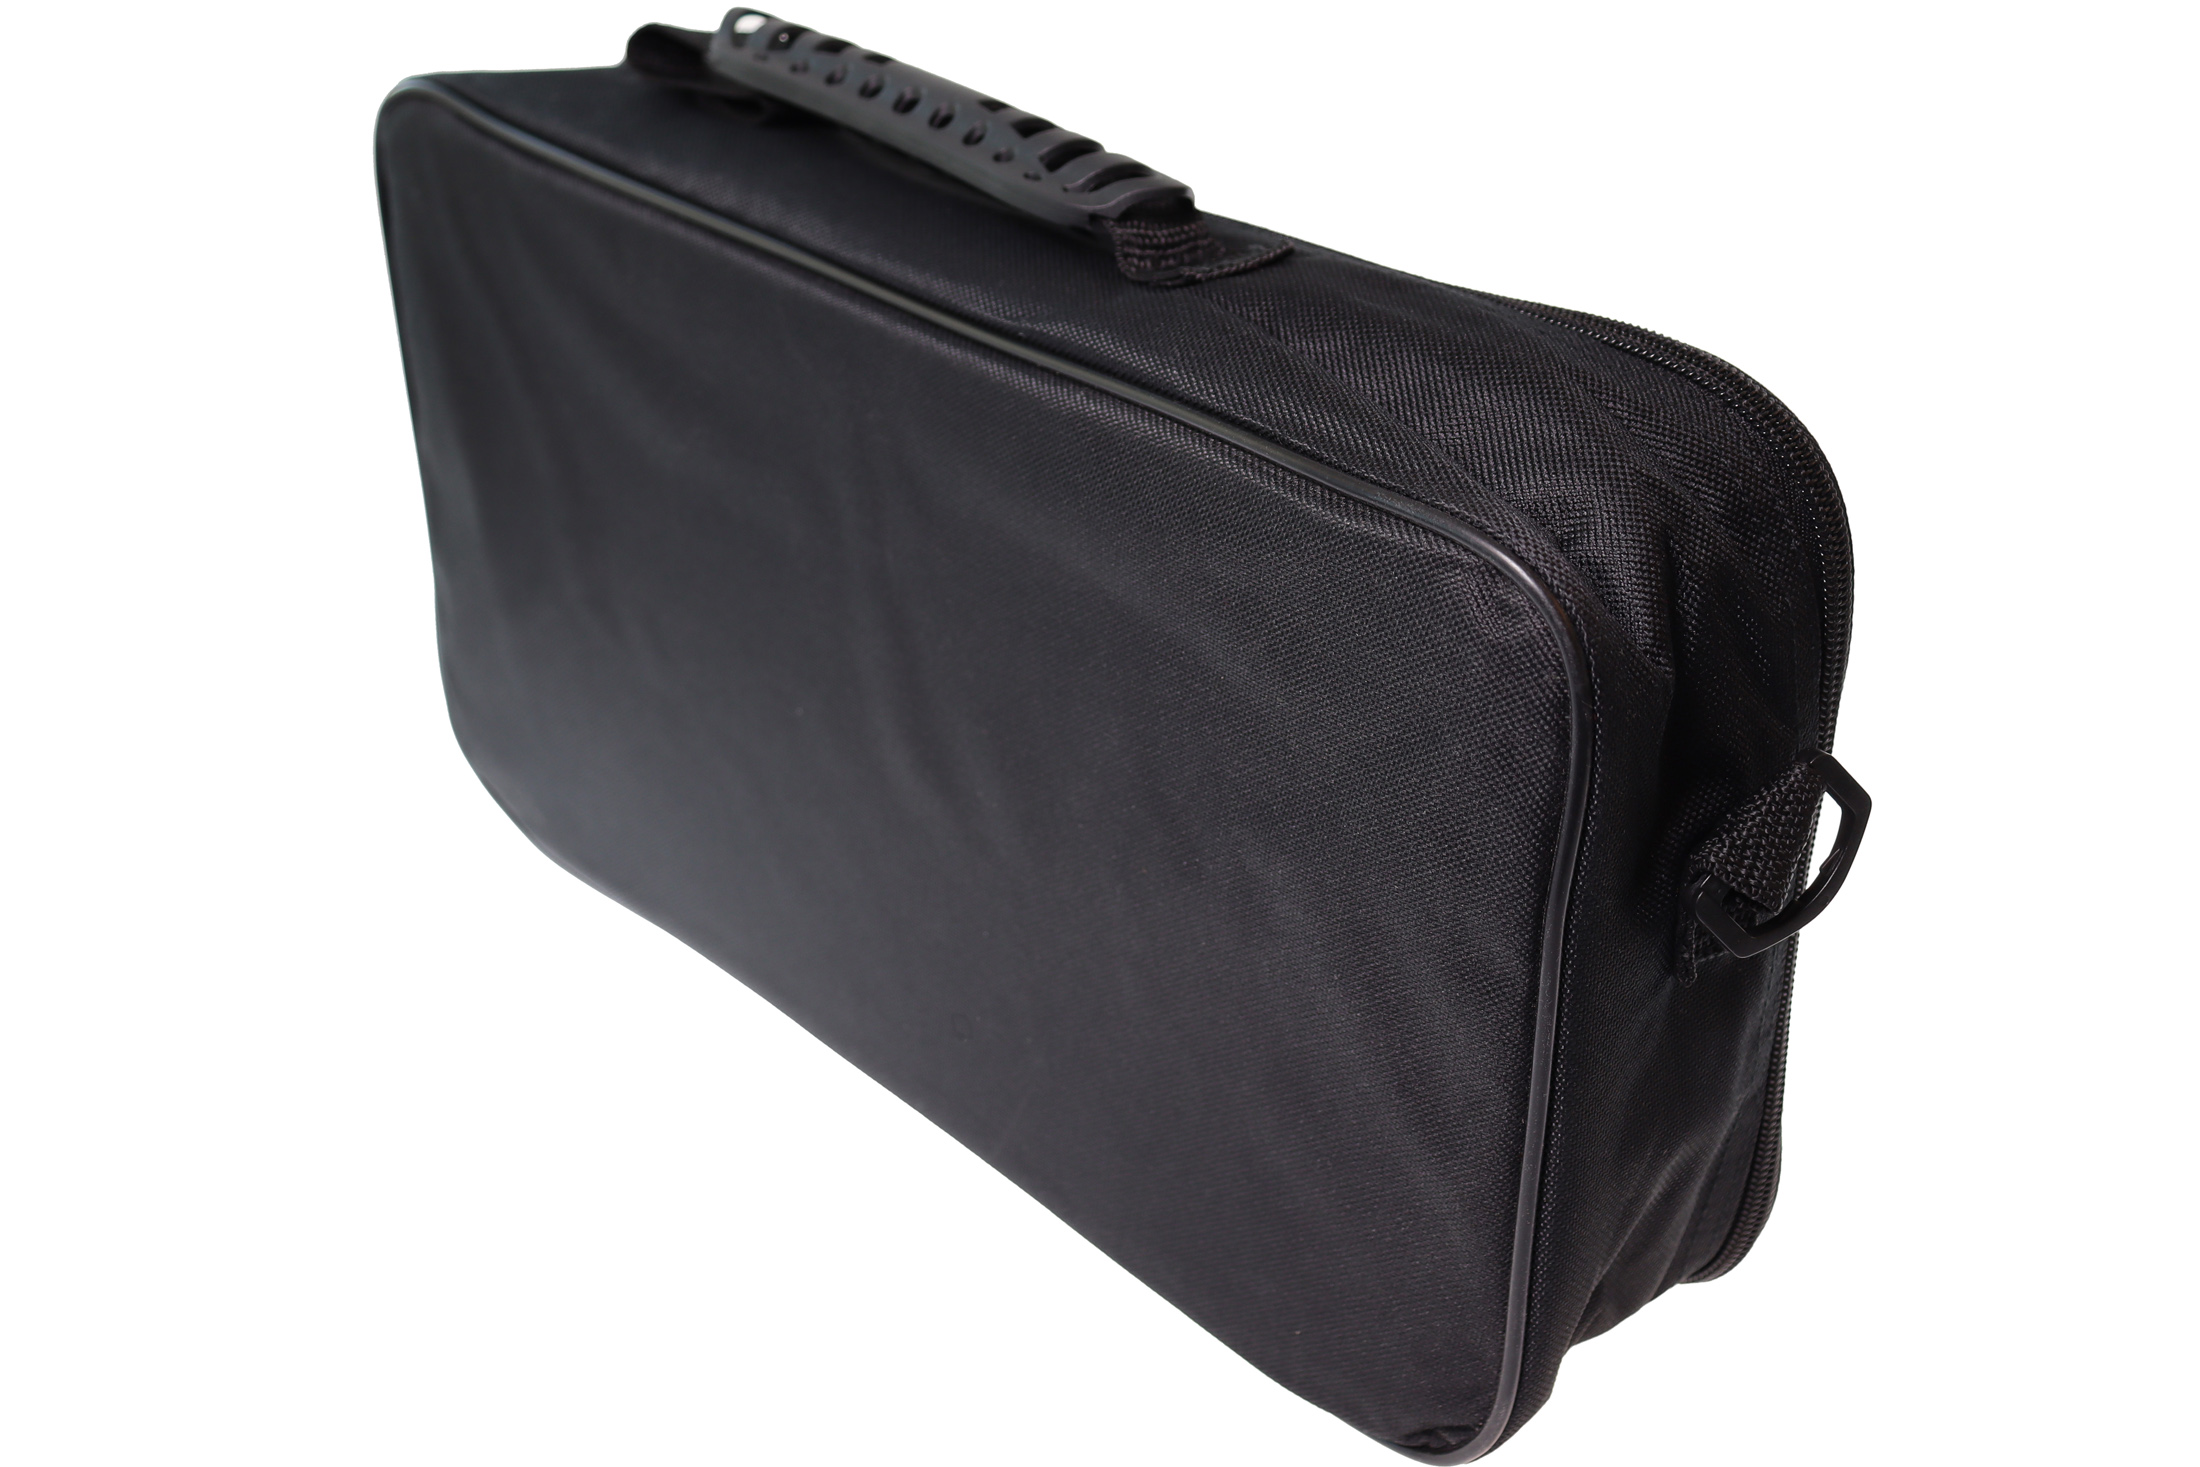 «PeakTech® P 7400» Carrying case for oscilloscopes